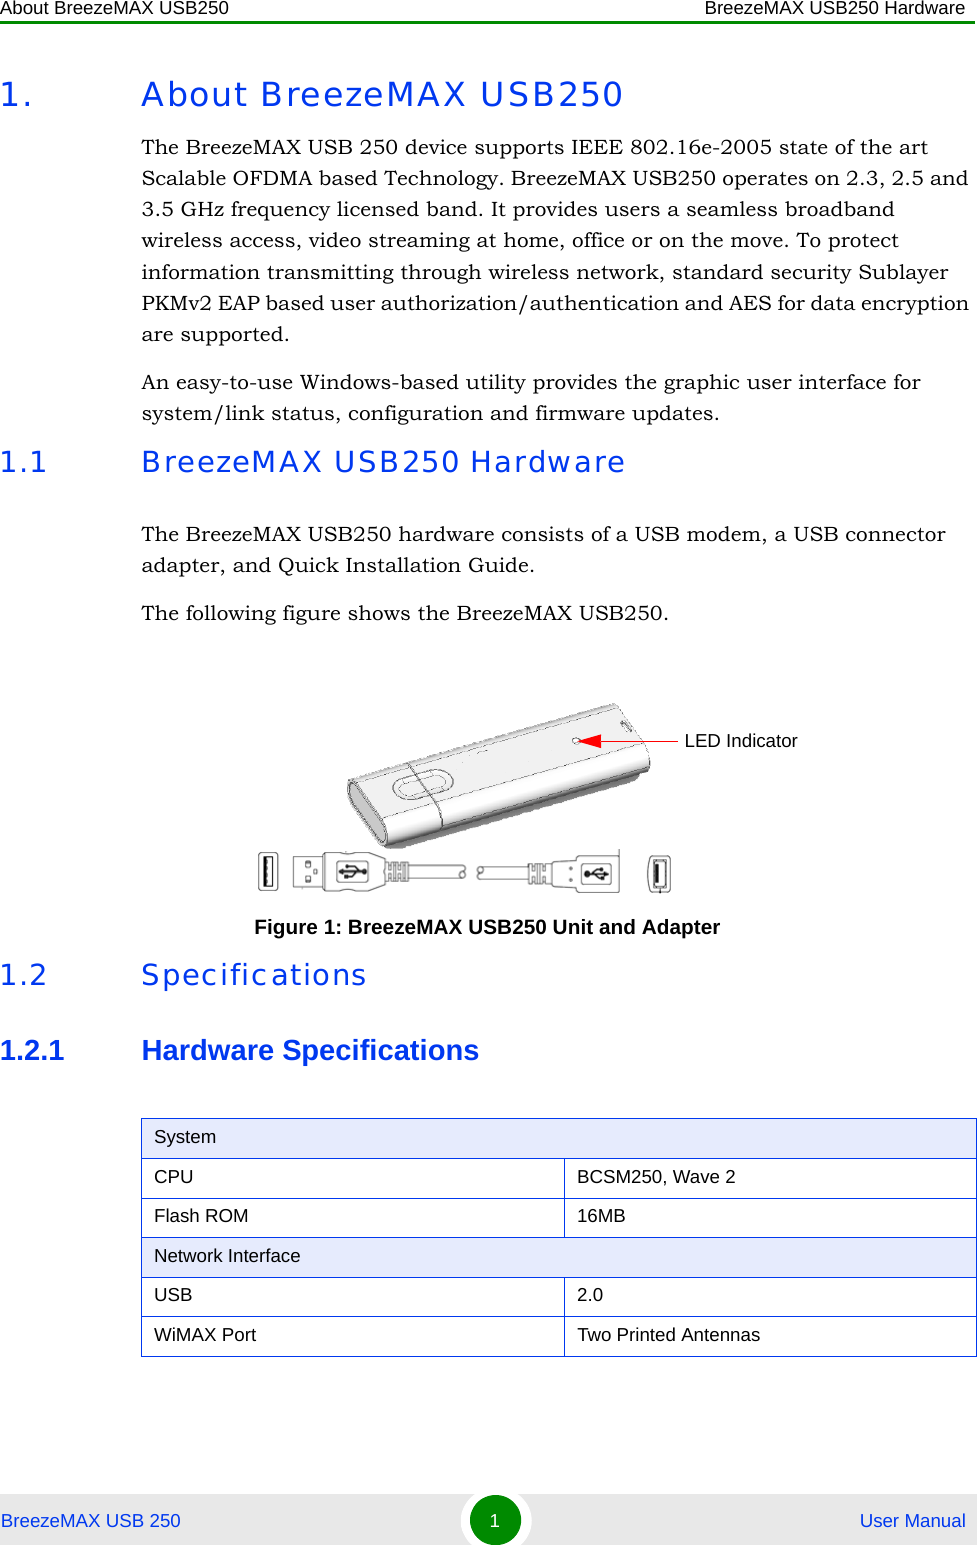 About BreezeMAX USB250 BreezeMAX USB250 HardwareBreezeMAX USB 250 1 User Manual1. About BreezeMAX USB250The BreezeMAX USB 250 device supports IEEE 802.16e-2005 state of the art Scalable OFDMA based Technology. BreezeMAX USB250 operates on 2.3, 2.5 and 3.5 GHz frequency licensed band. It provides users a seamless broadband wireless access, video streaming at home, office or on the move. To protect information transmitting through wireless network, standard security Sublayer PKMv2 EAP based user authorization/authentication and AES for data encryption are supported.An easy-to-use Windows-based utility provides the graphic user interface for system/link status, configuration and firmware updates.1.1 BreezeMAX USB250 HardwareThe BreezeMAX USB250 hardware consists of a USB modem, a USB connector adapter, and Quick Installation Guide.The following figure shows the BreezeMAX USB250.1.2 Specifications1.2.1 Hardware SpecificationsFigure 1: BreezeMAX USB250 Unit and AdapterSystemCPU BCSM250, Wave 2Flash ROM 16MB Network InterfaceUSB 2.0WiMAX Port Two Printed AntennasLED Indicator